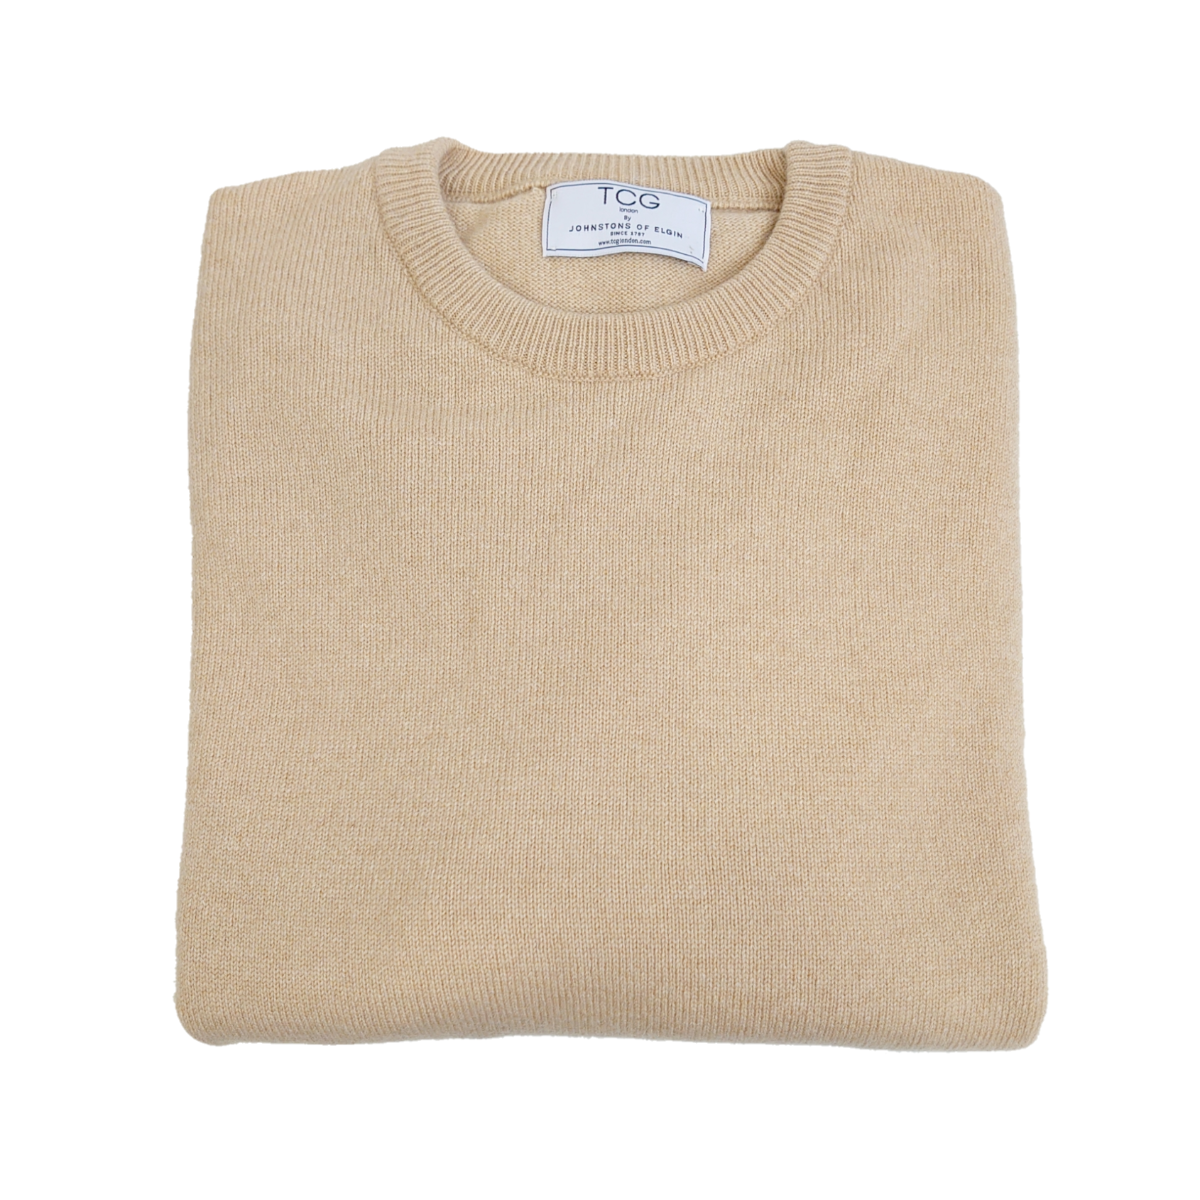 Men's Relaxed Fit Round Neck 100% Pure Cashmere Jumper - Natural - XXL